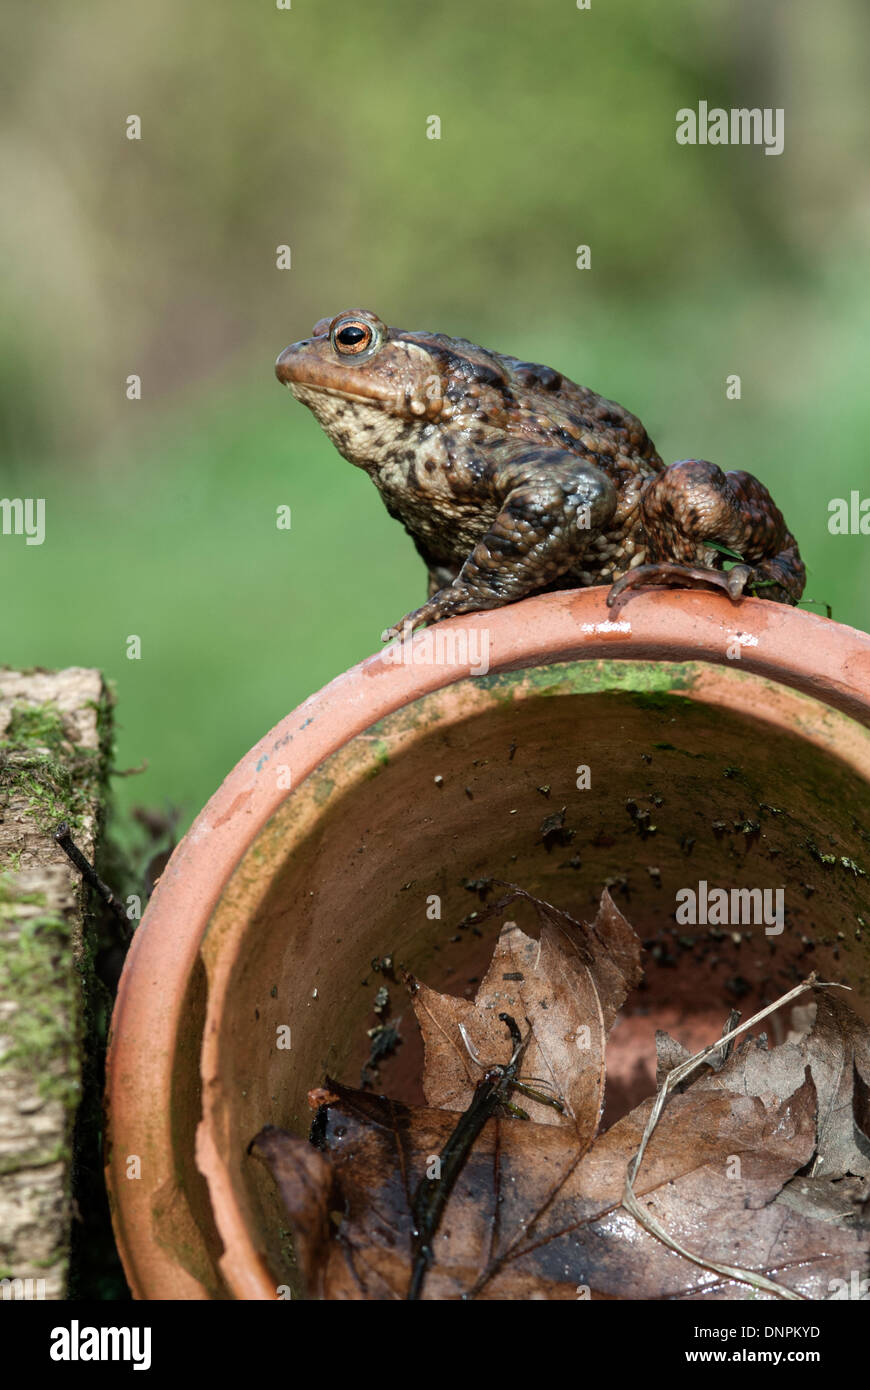 Crapaud commun, Bufo bufo Banque D'Images